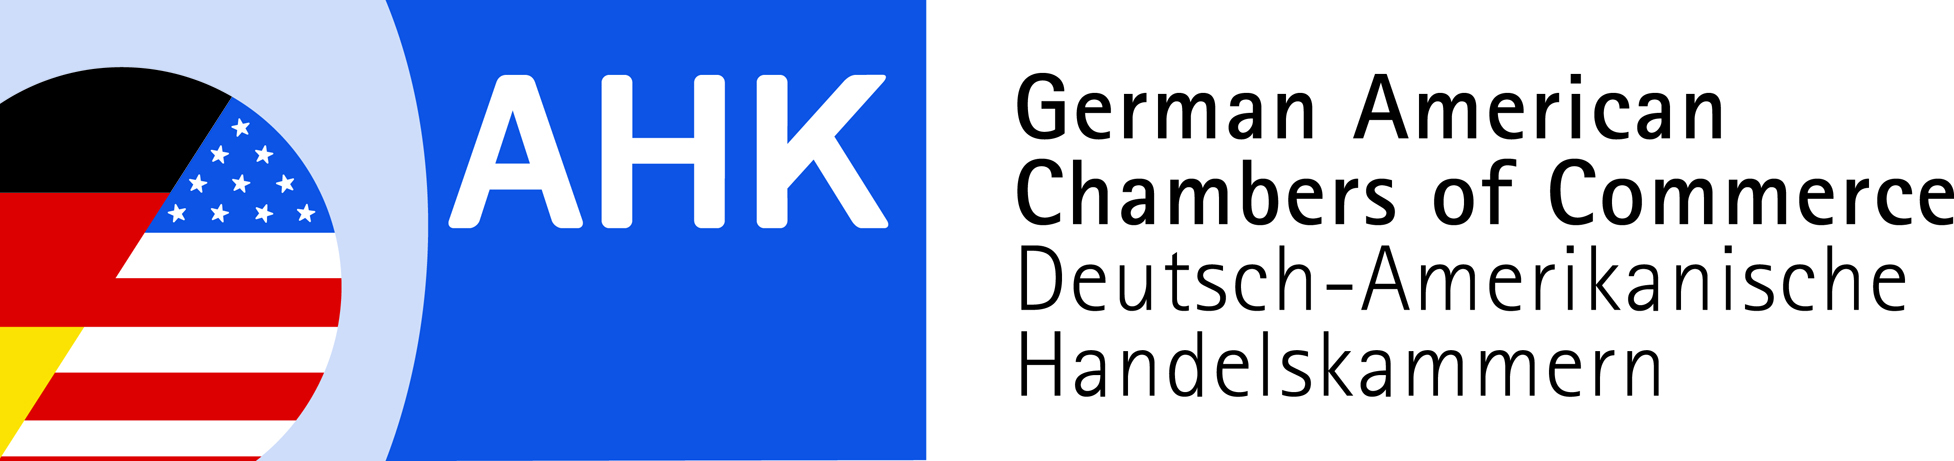 German-American Chamber of Commerce